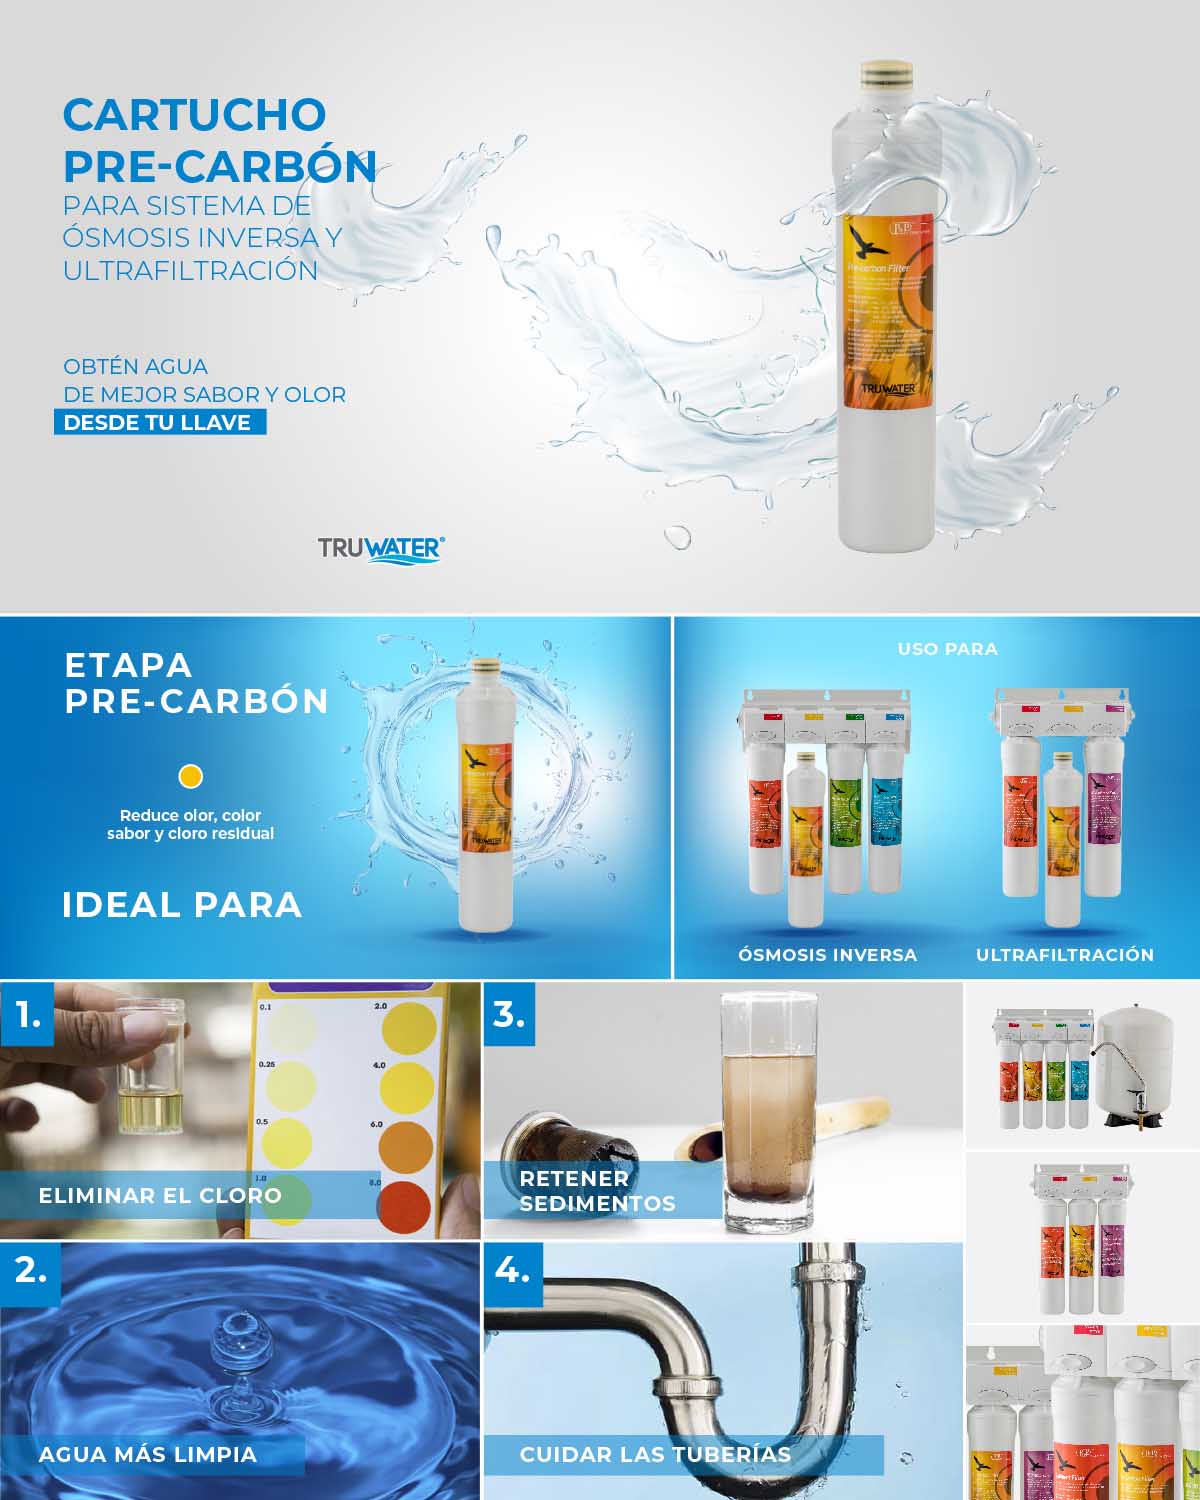 Cartucho Pre-Carbon TW-OIP2 Truwater